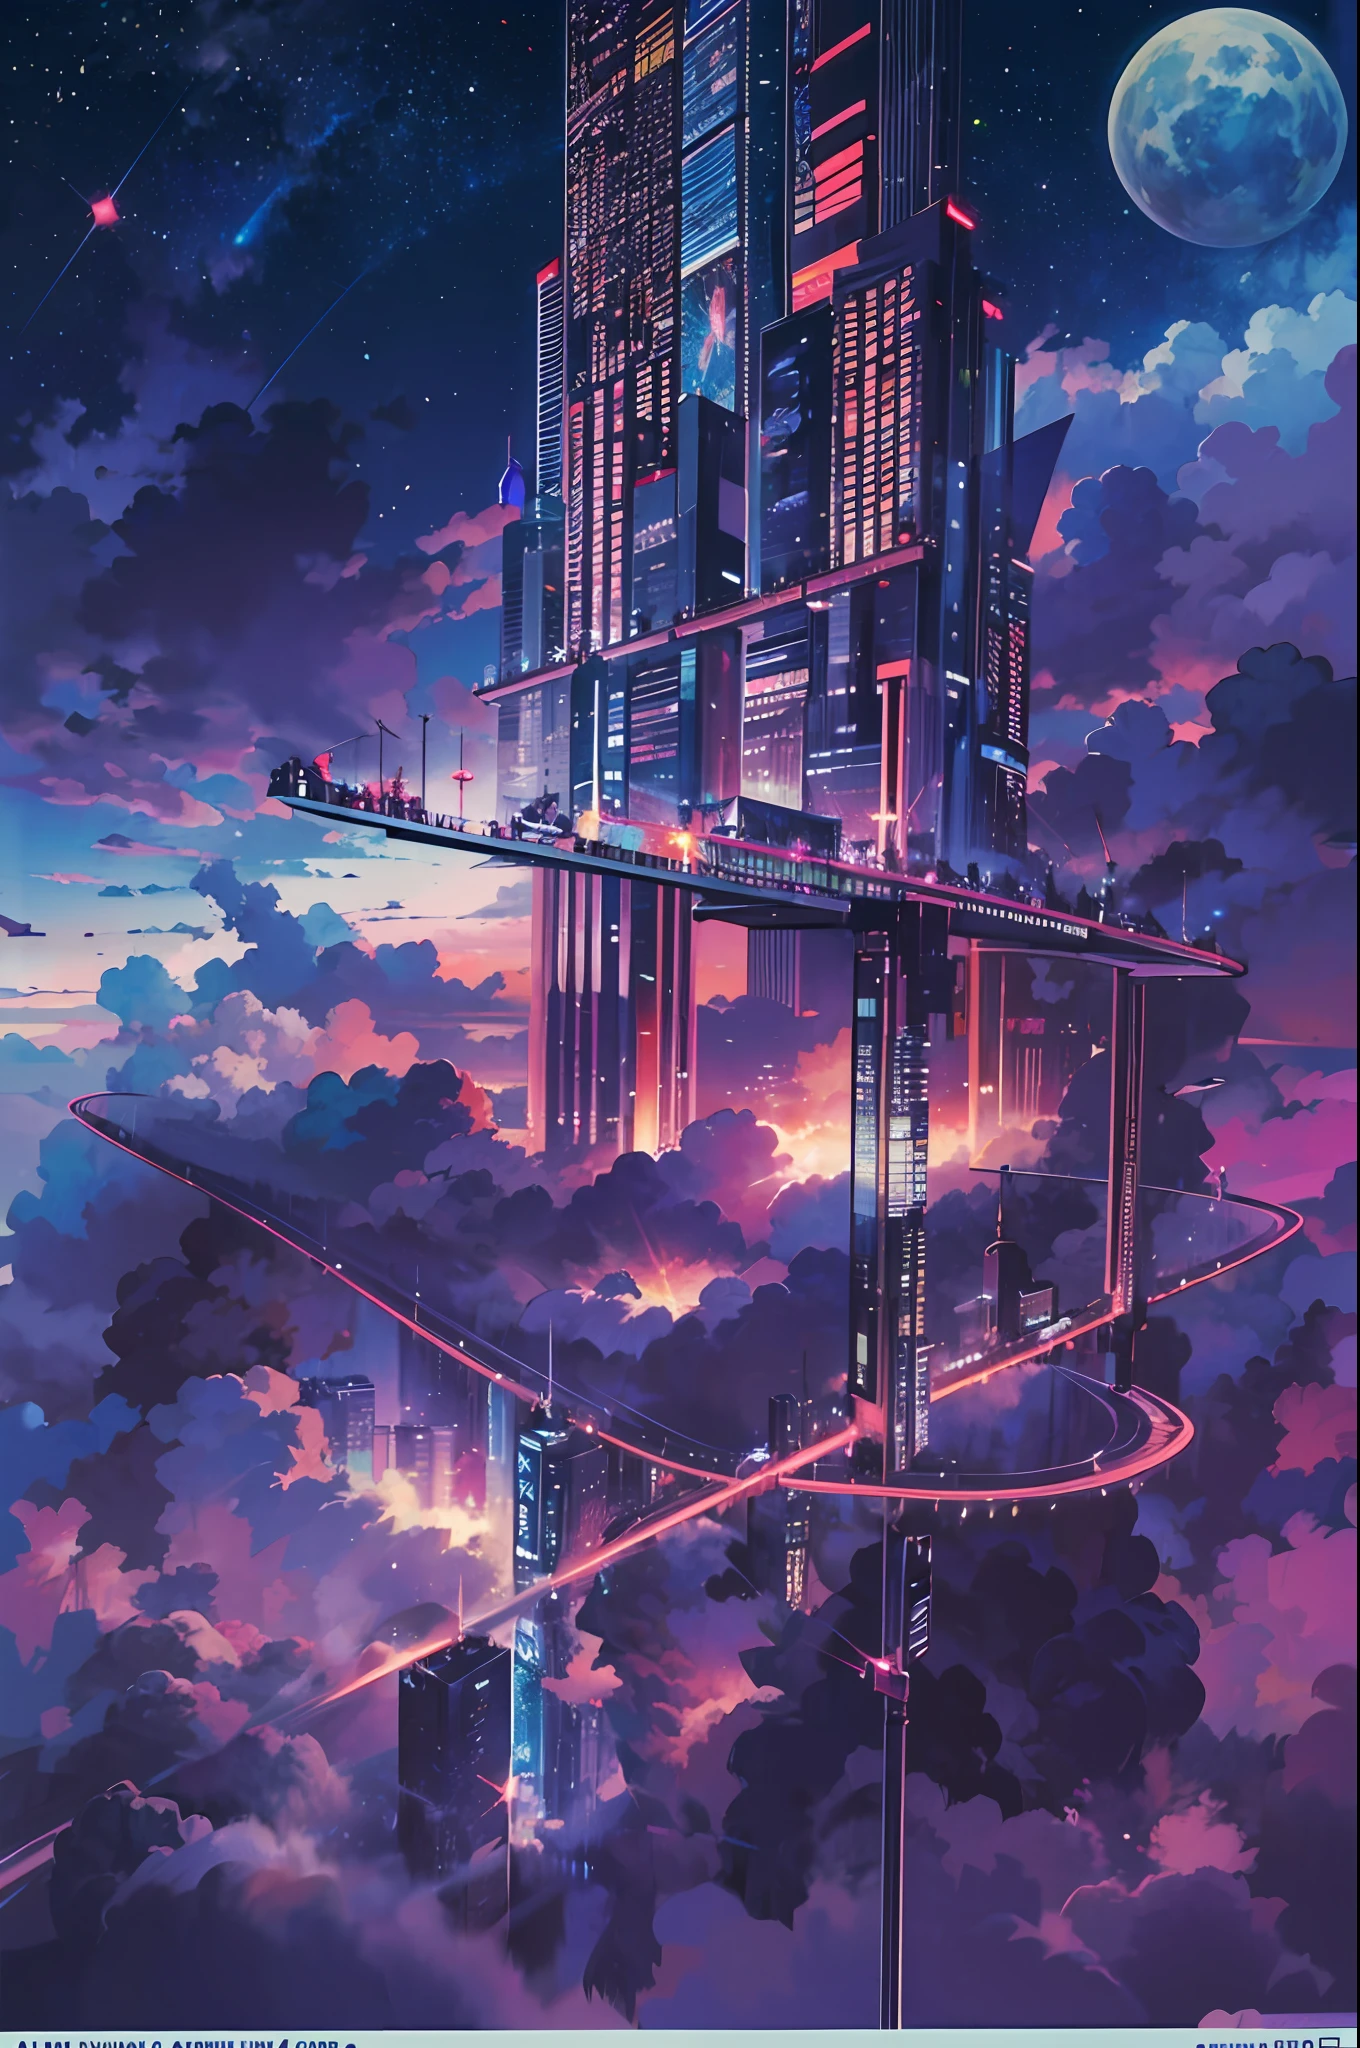 （levitating：1.5），（A huge mechanical city floating in space：1.3），（The brightly lit city of the future：1.4），（Thick clouds：1.4），（Estilo de Makoto Shinkai：1.4），Rejoice，Perfect quality，Clear focus（Clutter - home：0.8）， （tmasterpiece：1.2）， （realisticlying：1.2） ，（with light glowing：1.2）， （best qualtiy）， （Detailed starry sky：1.3） ，（complexdetails）， （8K）， （Detail clouds） ，（Sharp focus），（having fun），（Award-winning digital artwork：1.3） af （sketching：1.3），（with dynamism：1.3）,studiolight,Theme，looking from above, the space, afloat， --v 6